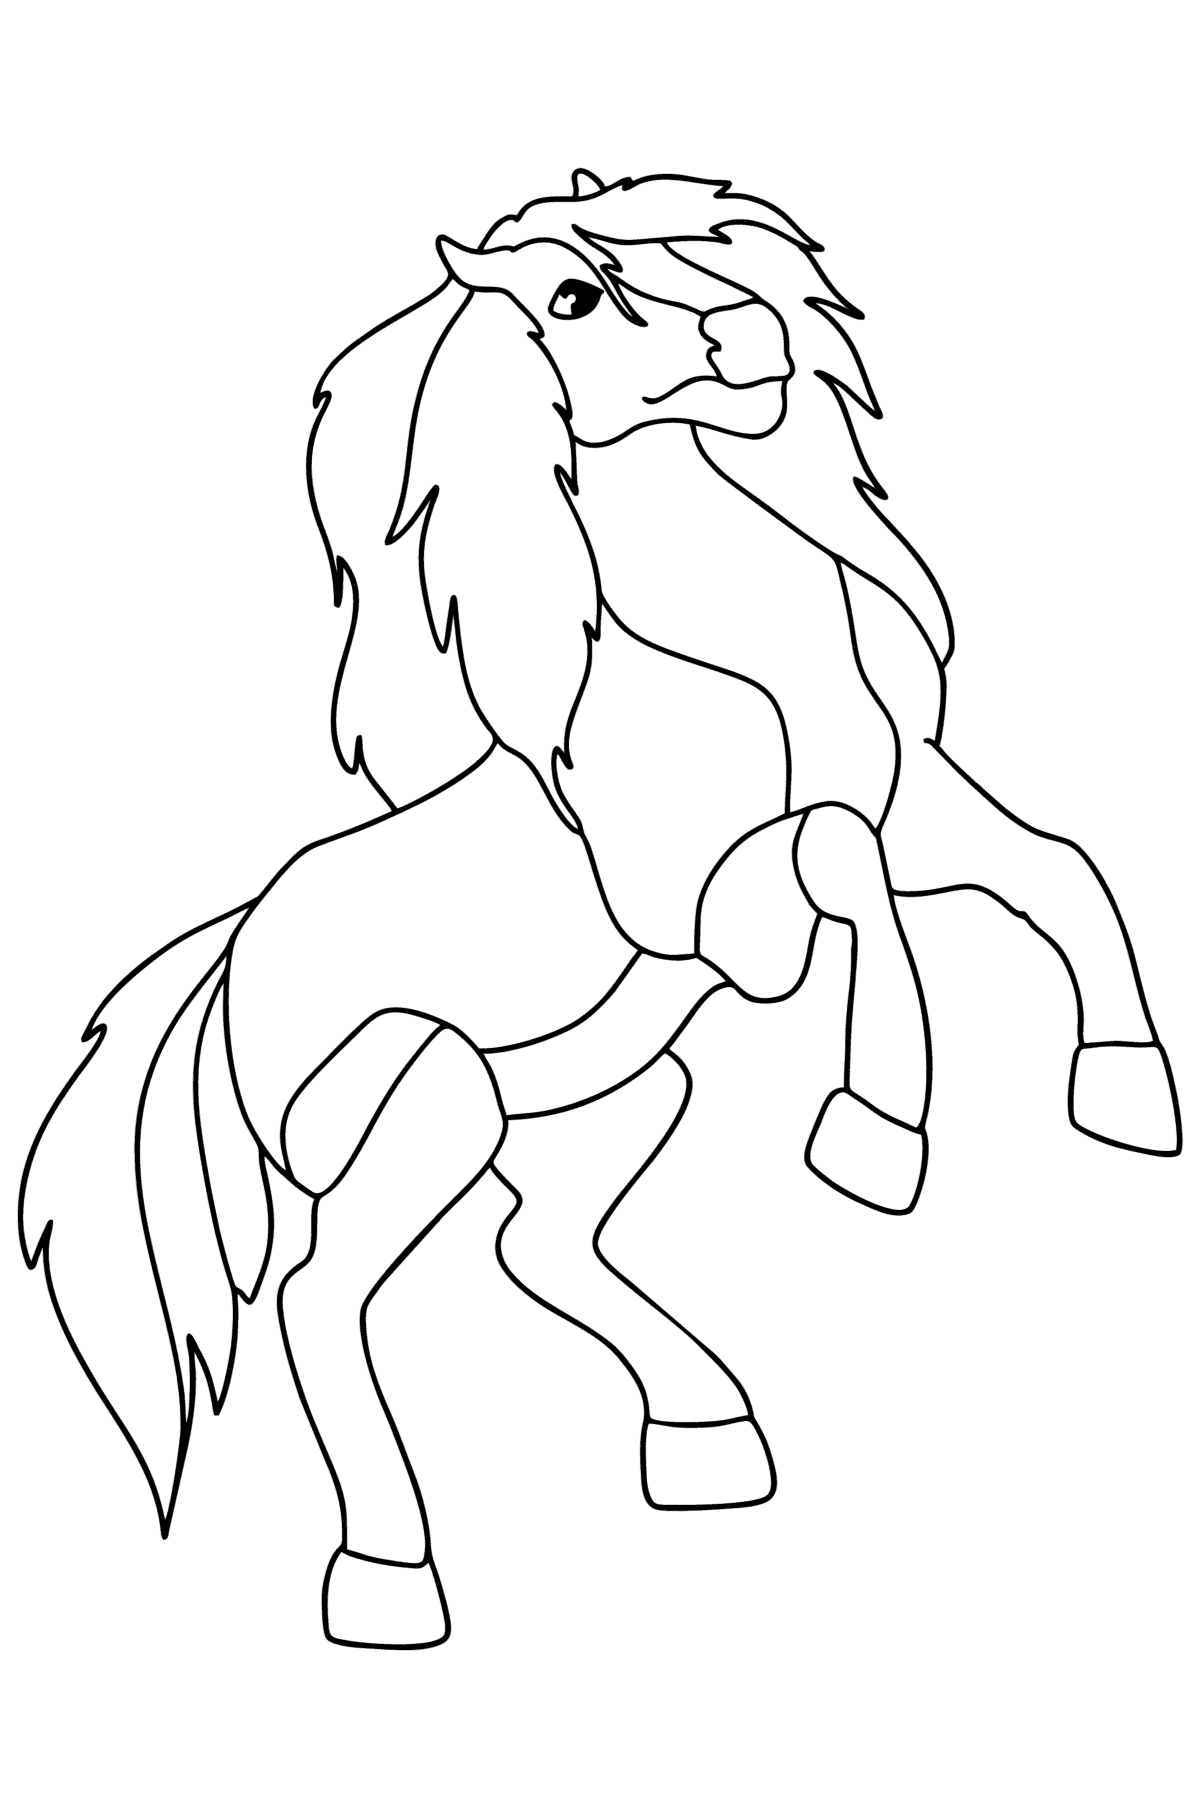 Young arab horse сoloring page - Coloring Pages for Kids